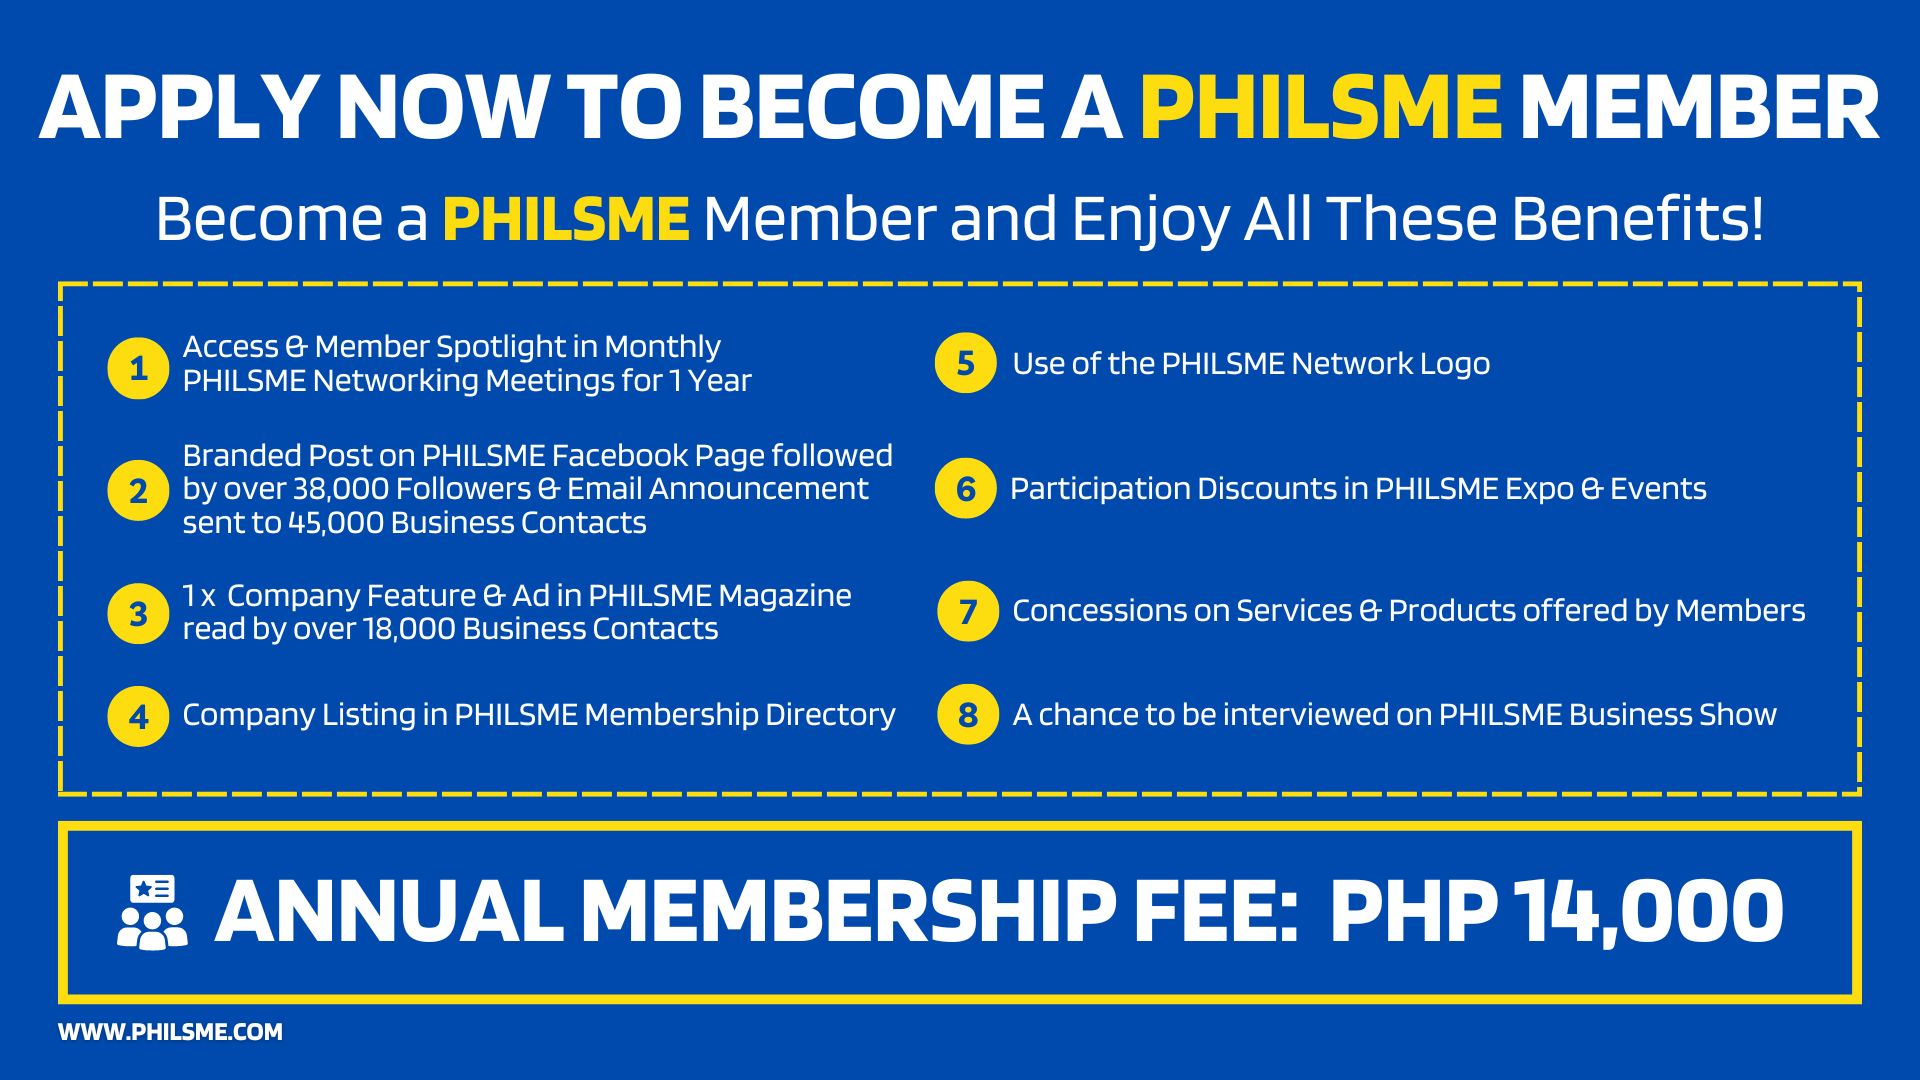 Become a PHILSME Network Member and Enjoy These Promotions